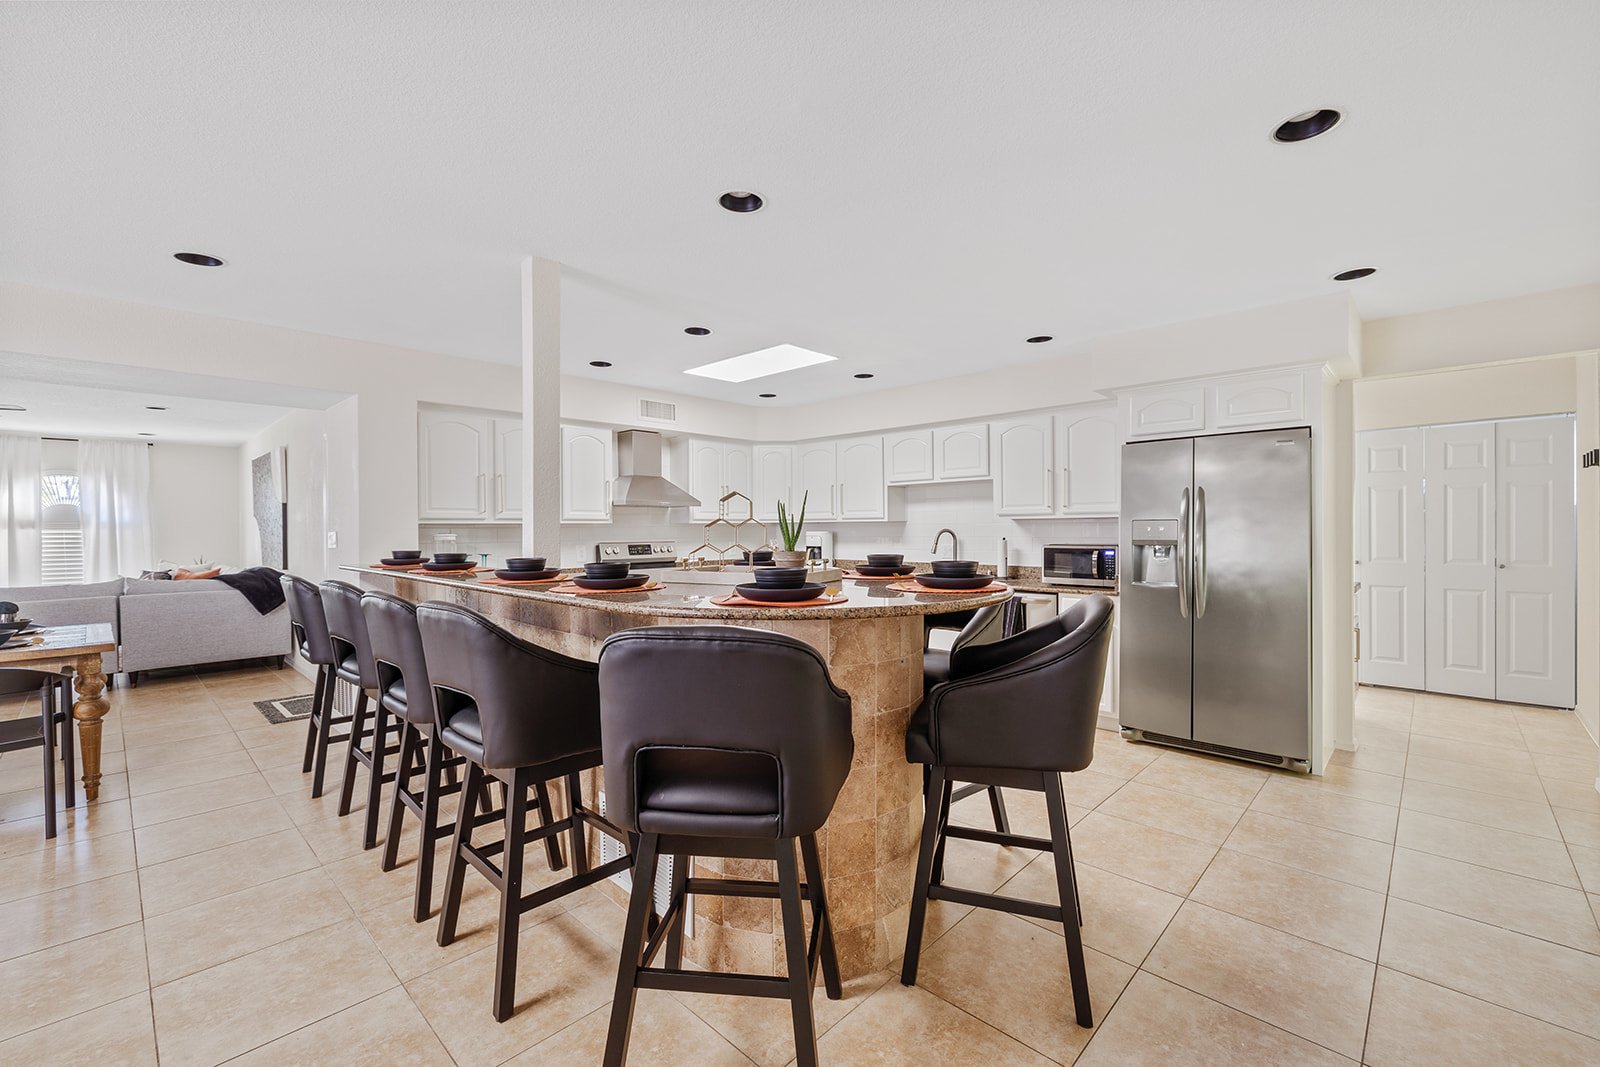 Open kitchen with ample bar seating.